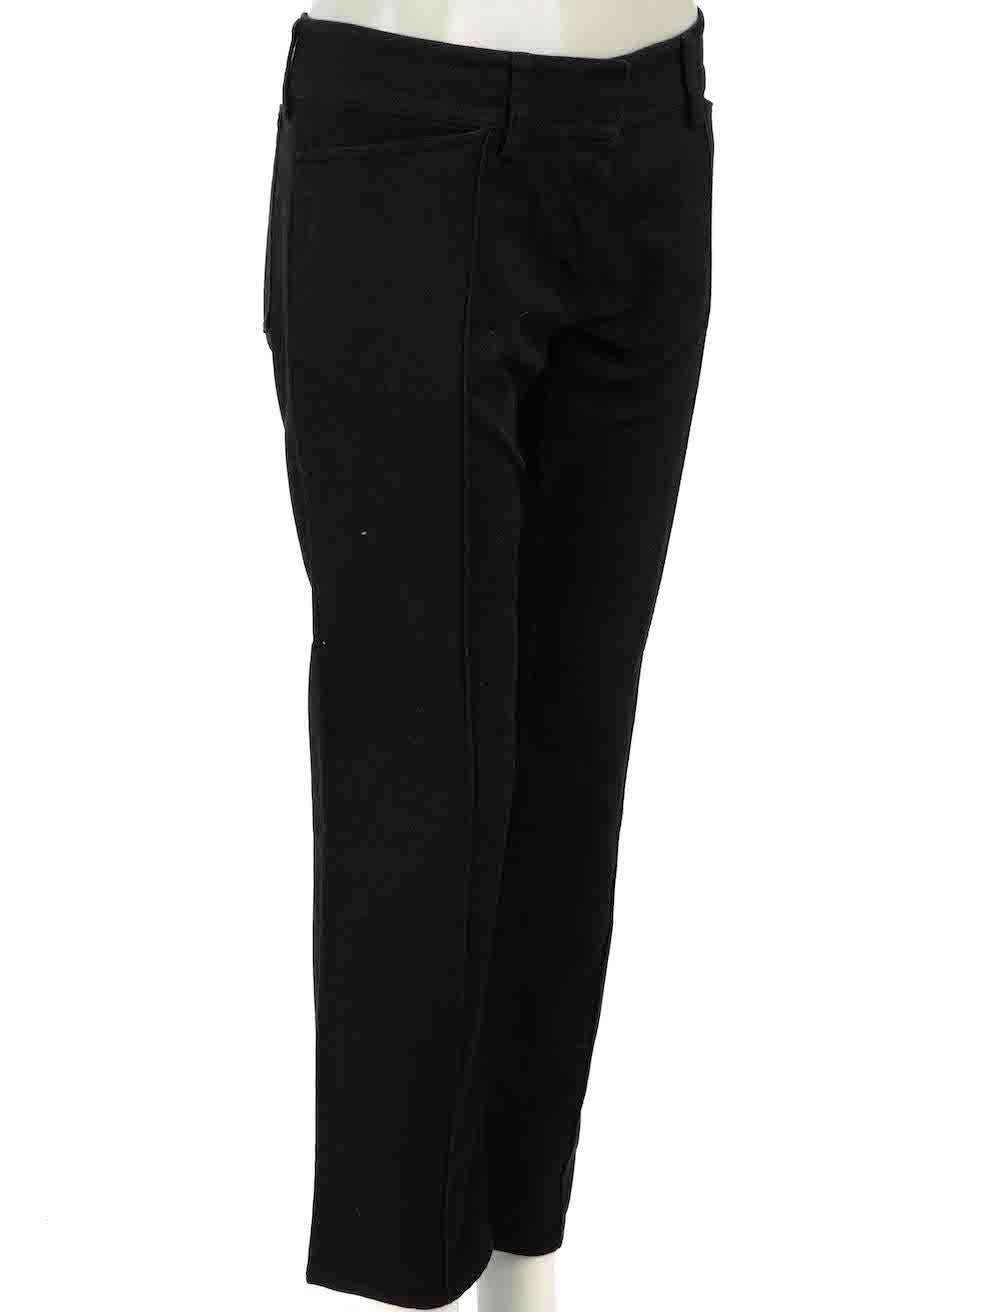 CONDITION is Very good. Minimal wear to trousers is evident. Minimal wear to seams where back left belt loop has come partially unstitched on this used Le Dix Balenciaga designer resale item.

Details
Black
Cotton
Straight leg trousers
Low rise
Seam